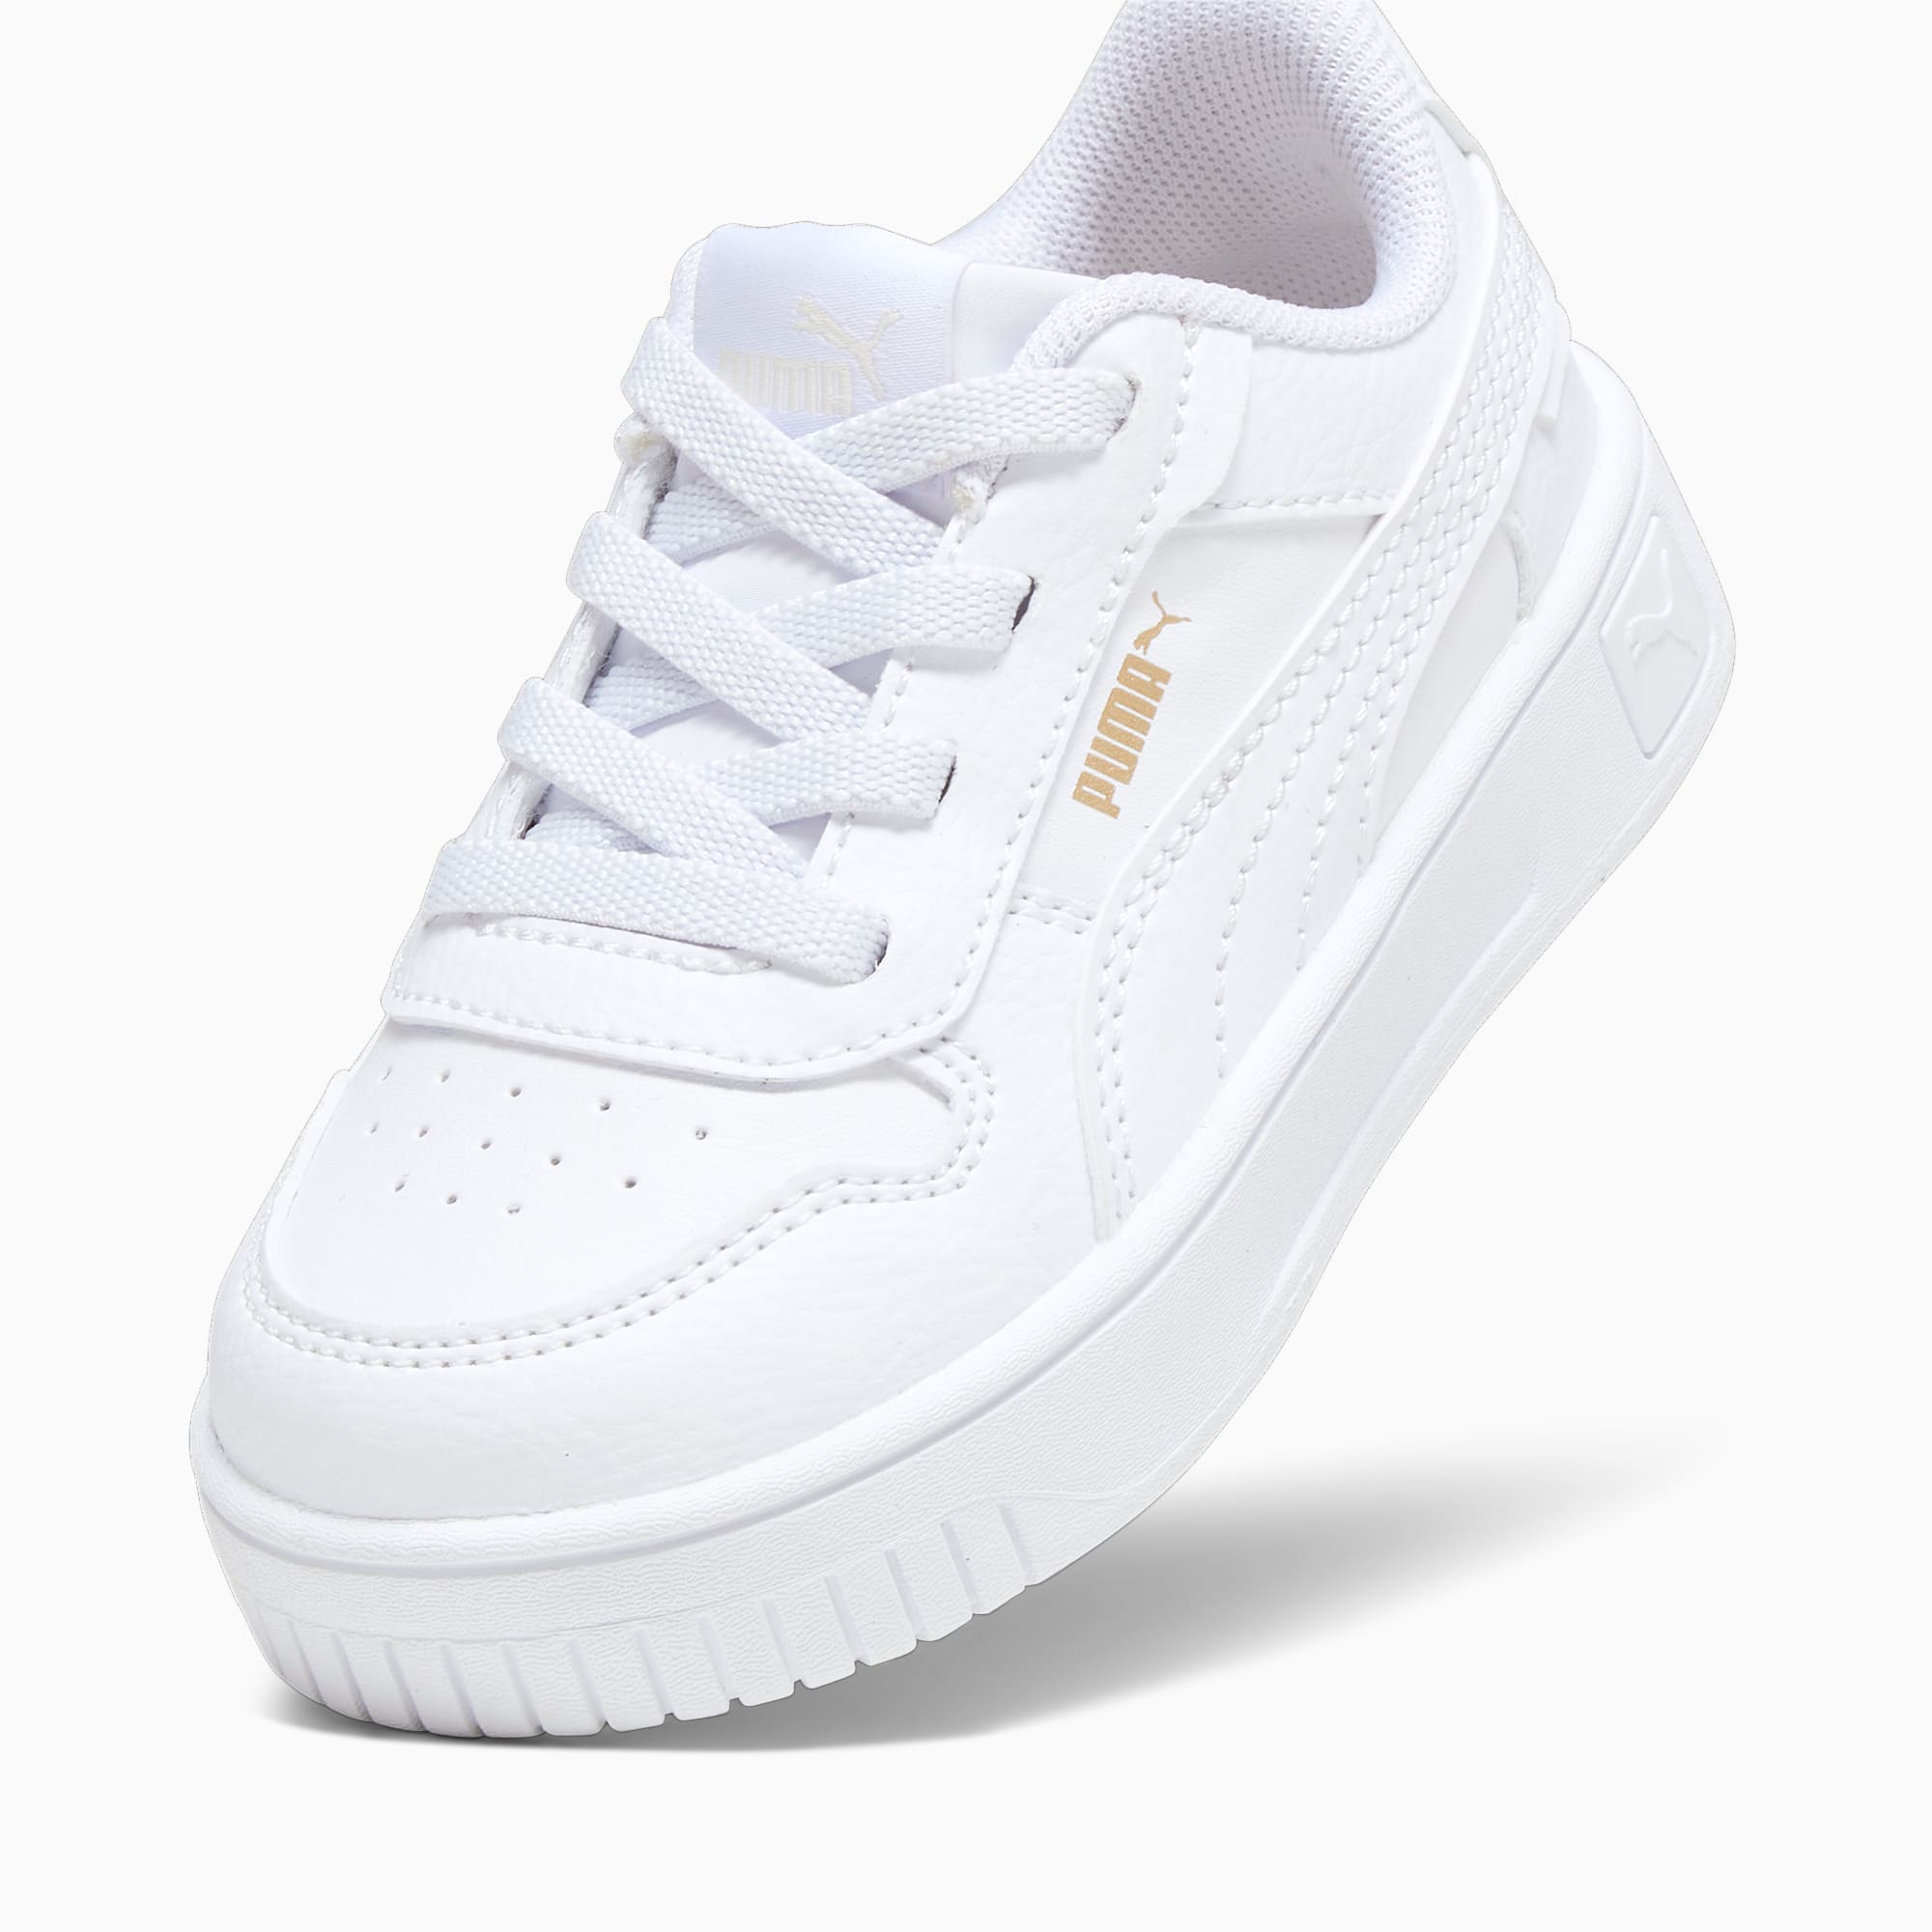 PUMA Carina Street Toddlers' Sneakers, White/Gold, Size 19, Shoes